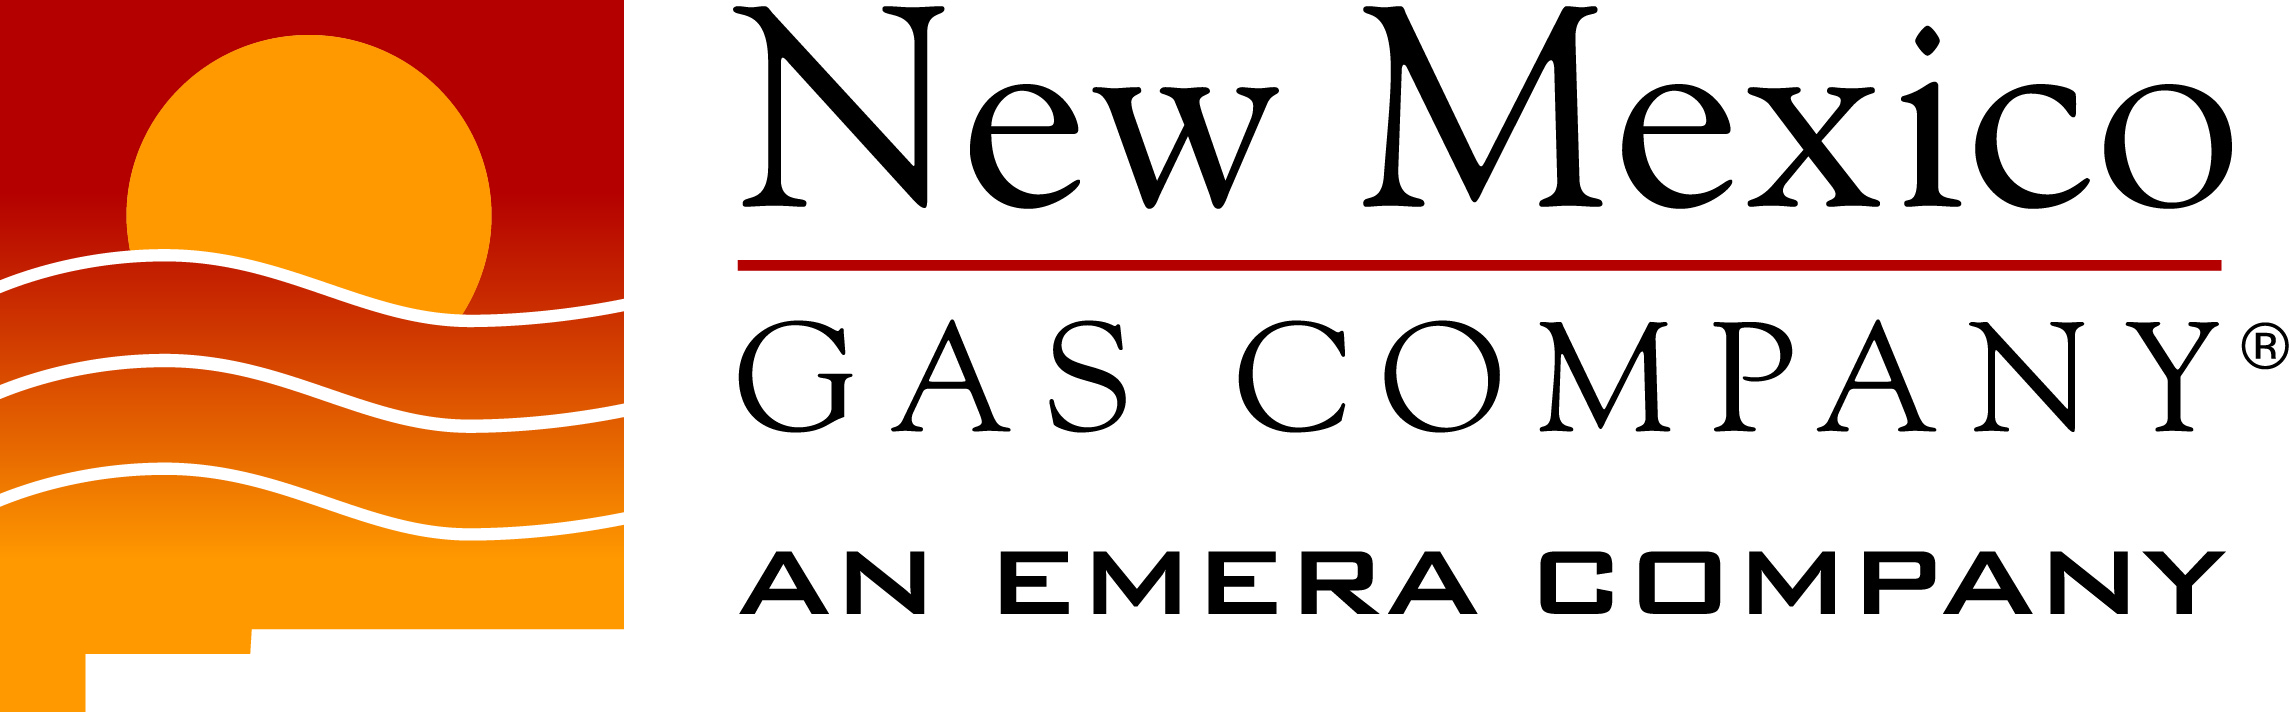 Gas Company of New Mexico's Image